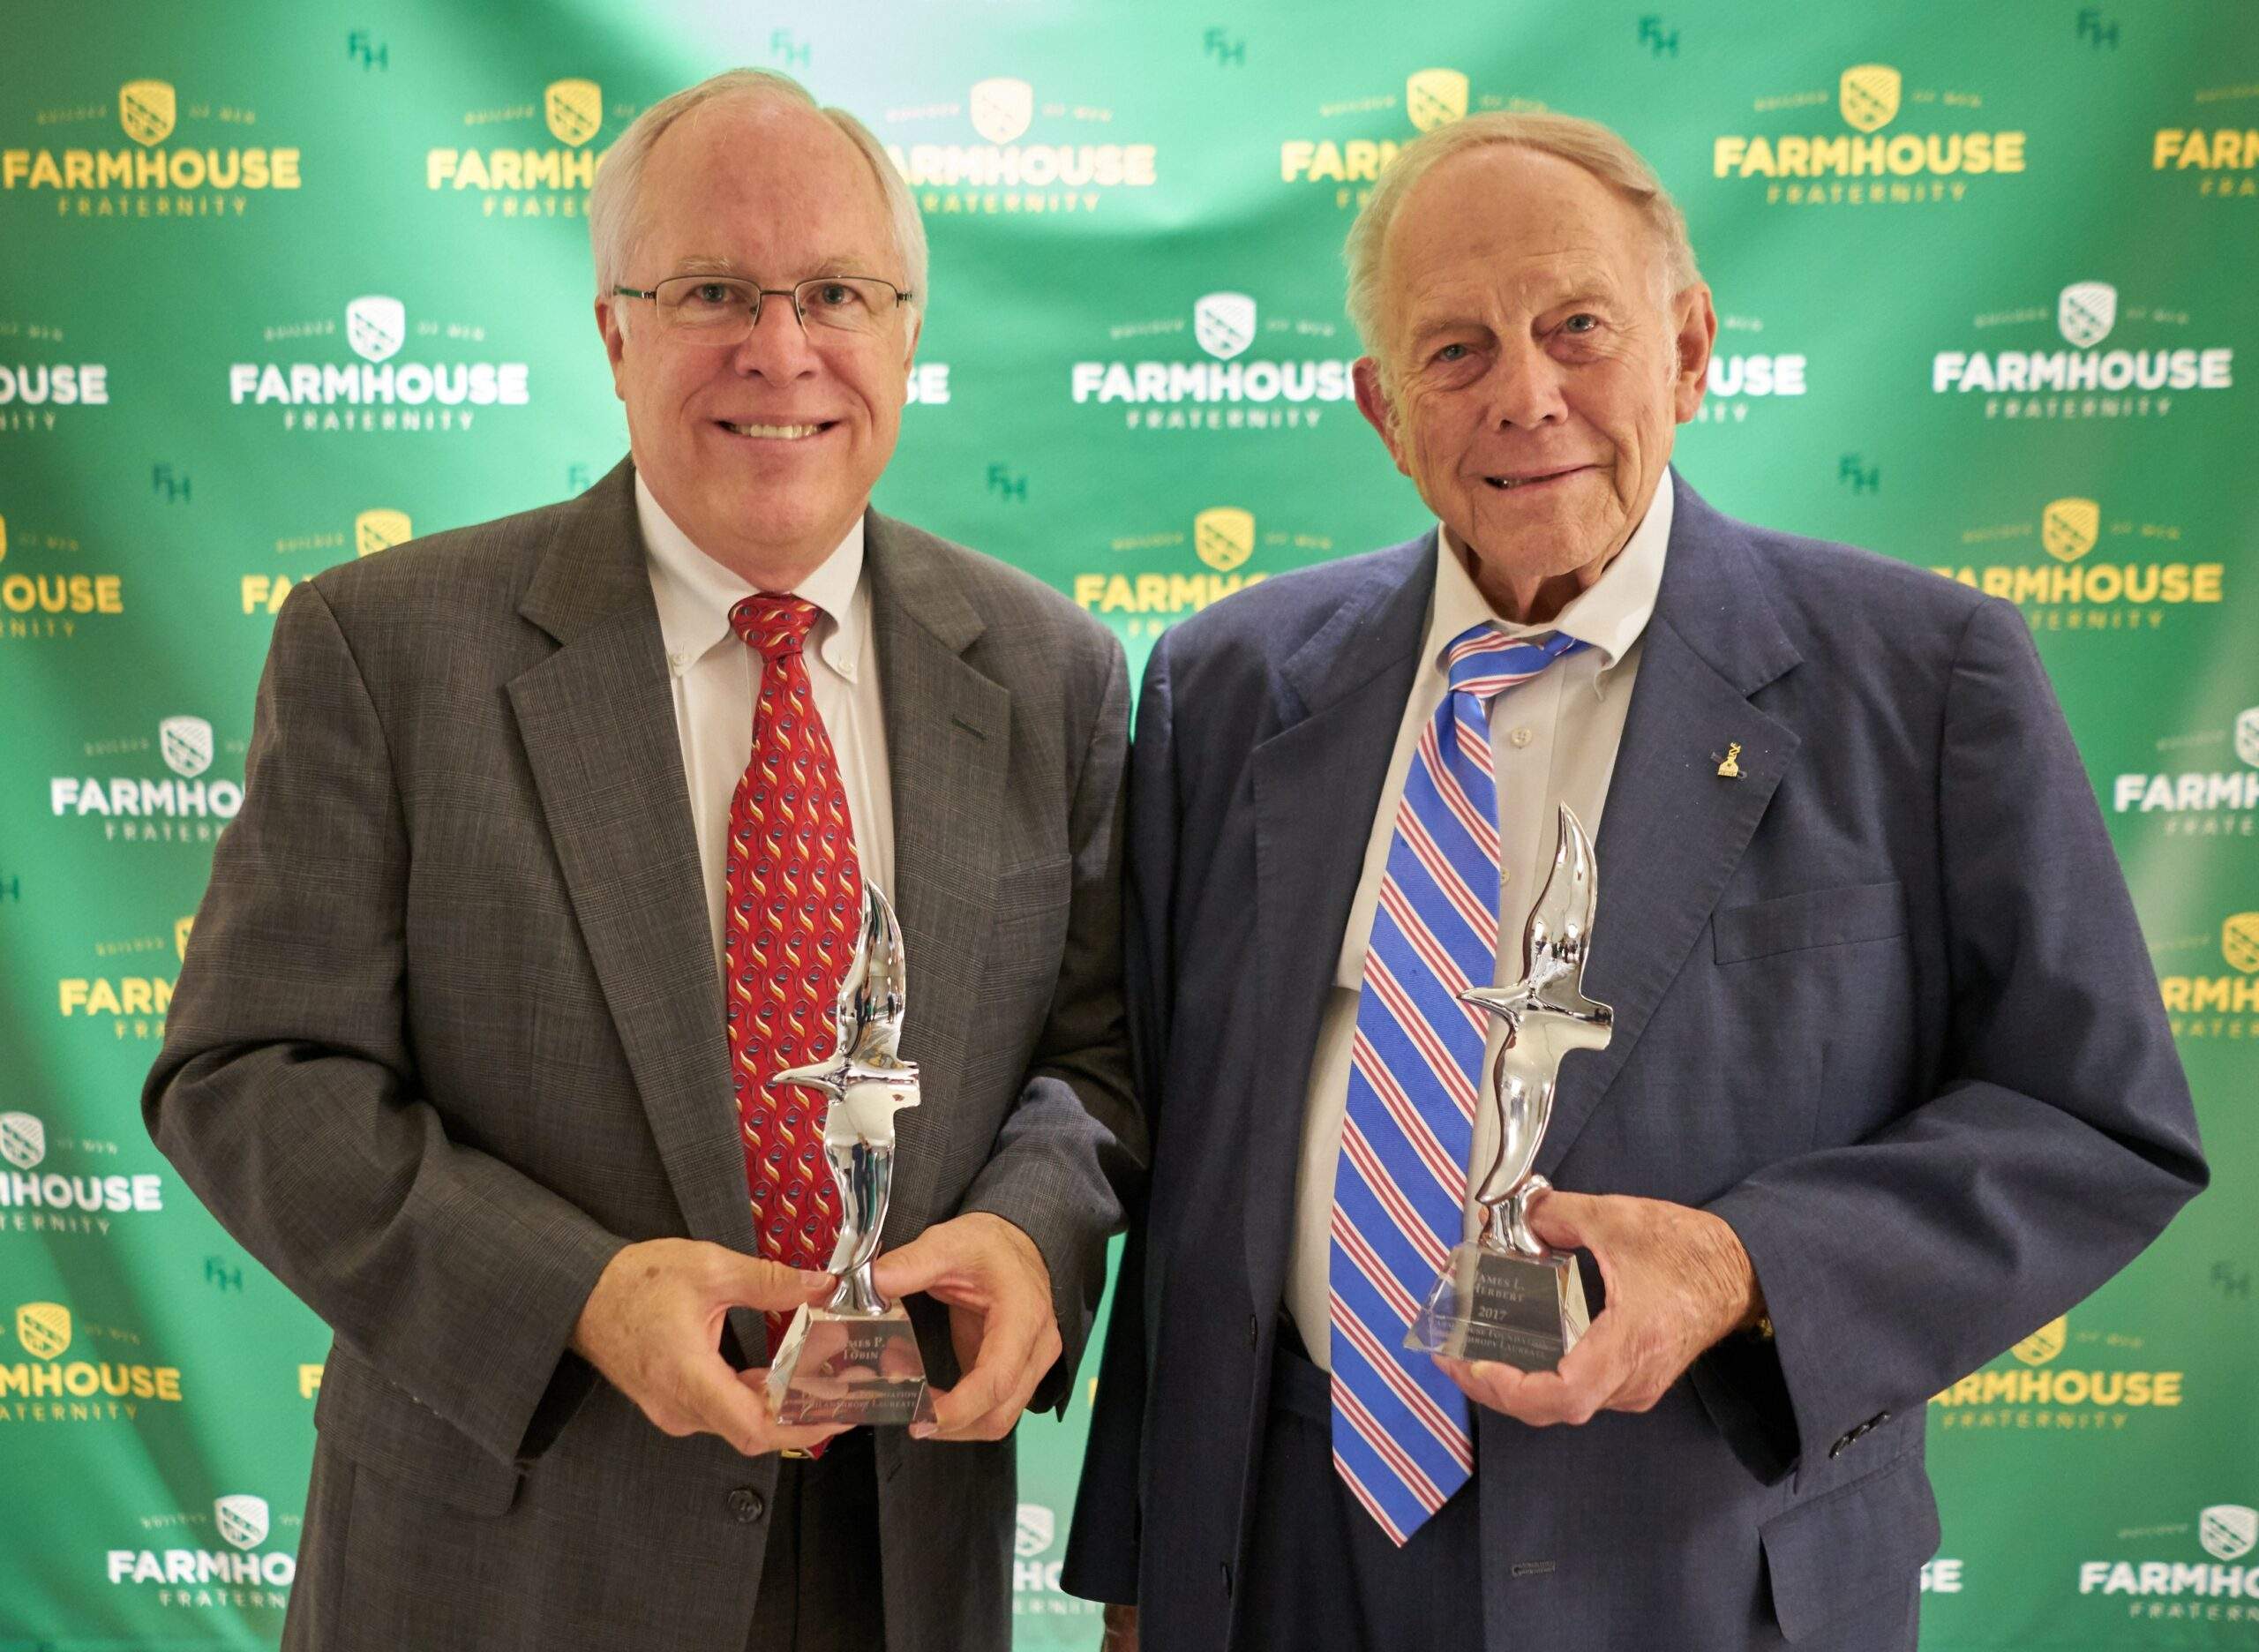 Jim Tobin (Iowa State 76) and Jim Herbert (Tennessee 61) receiving the Philanthropy Laureate Award together at the 2018 Conclave.